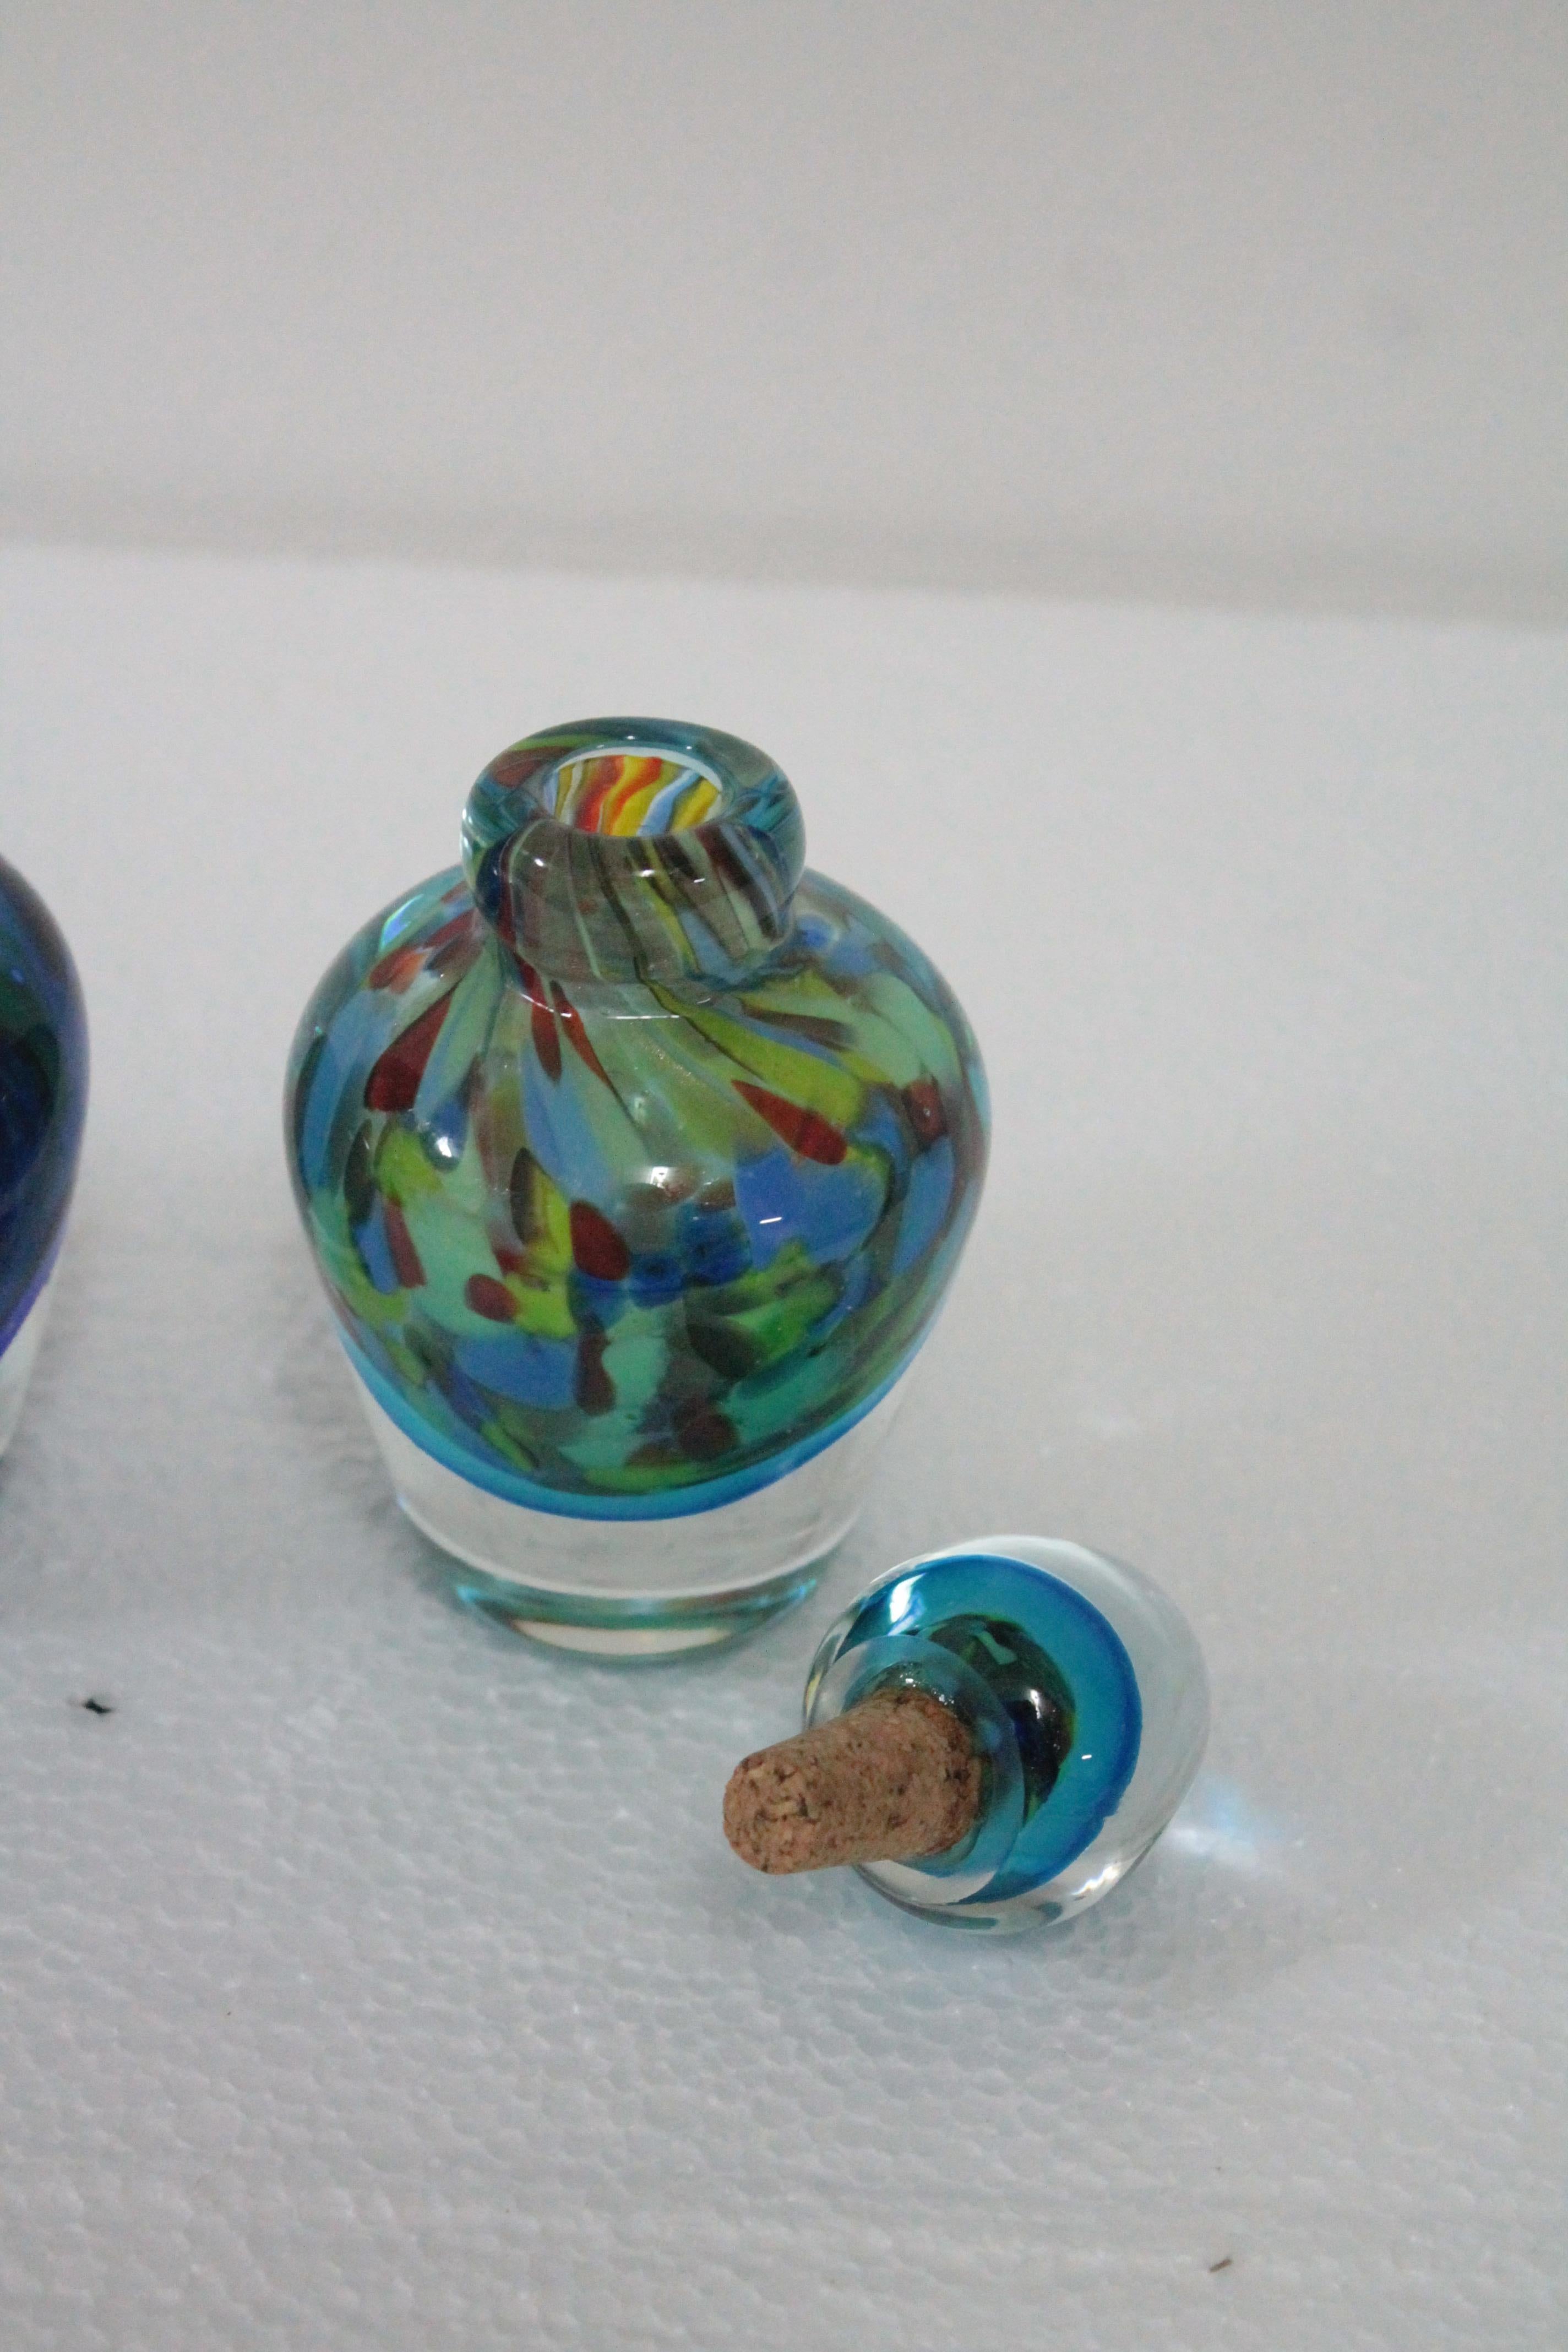 Set of three Venetian Murano glass bottles from the 1970s submerged glass technique, fantastic Christmas gift idea.